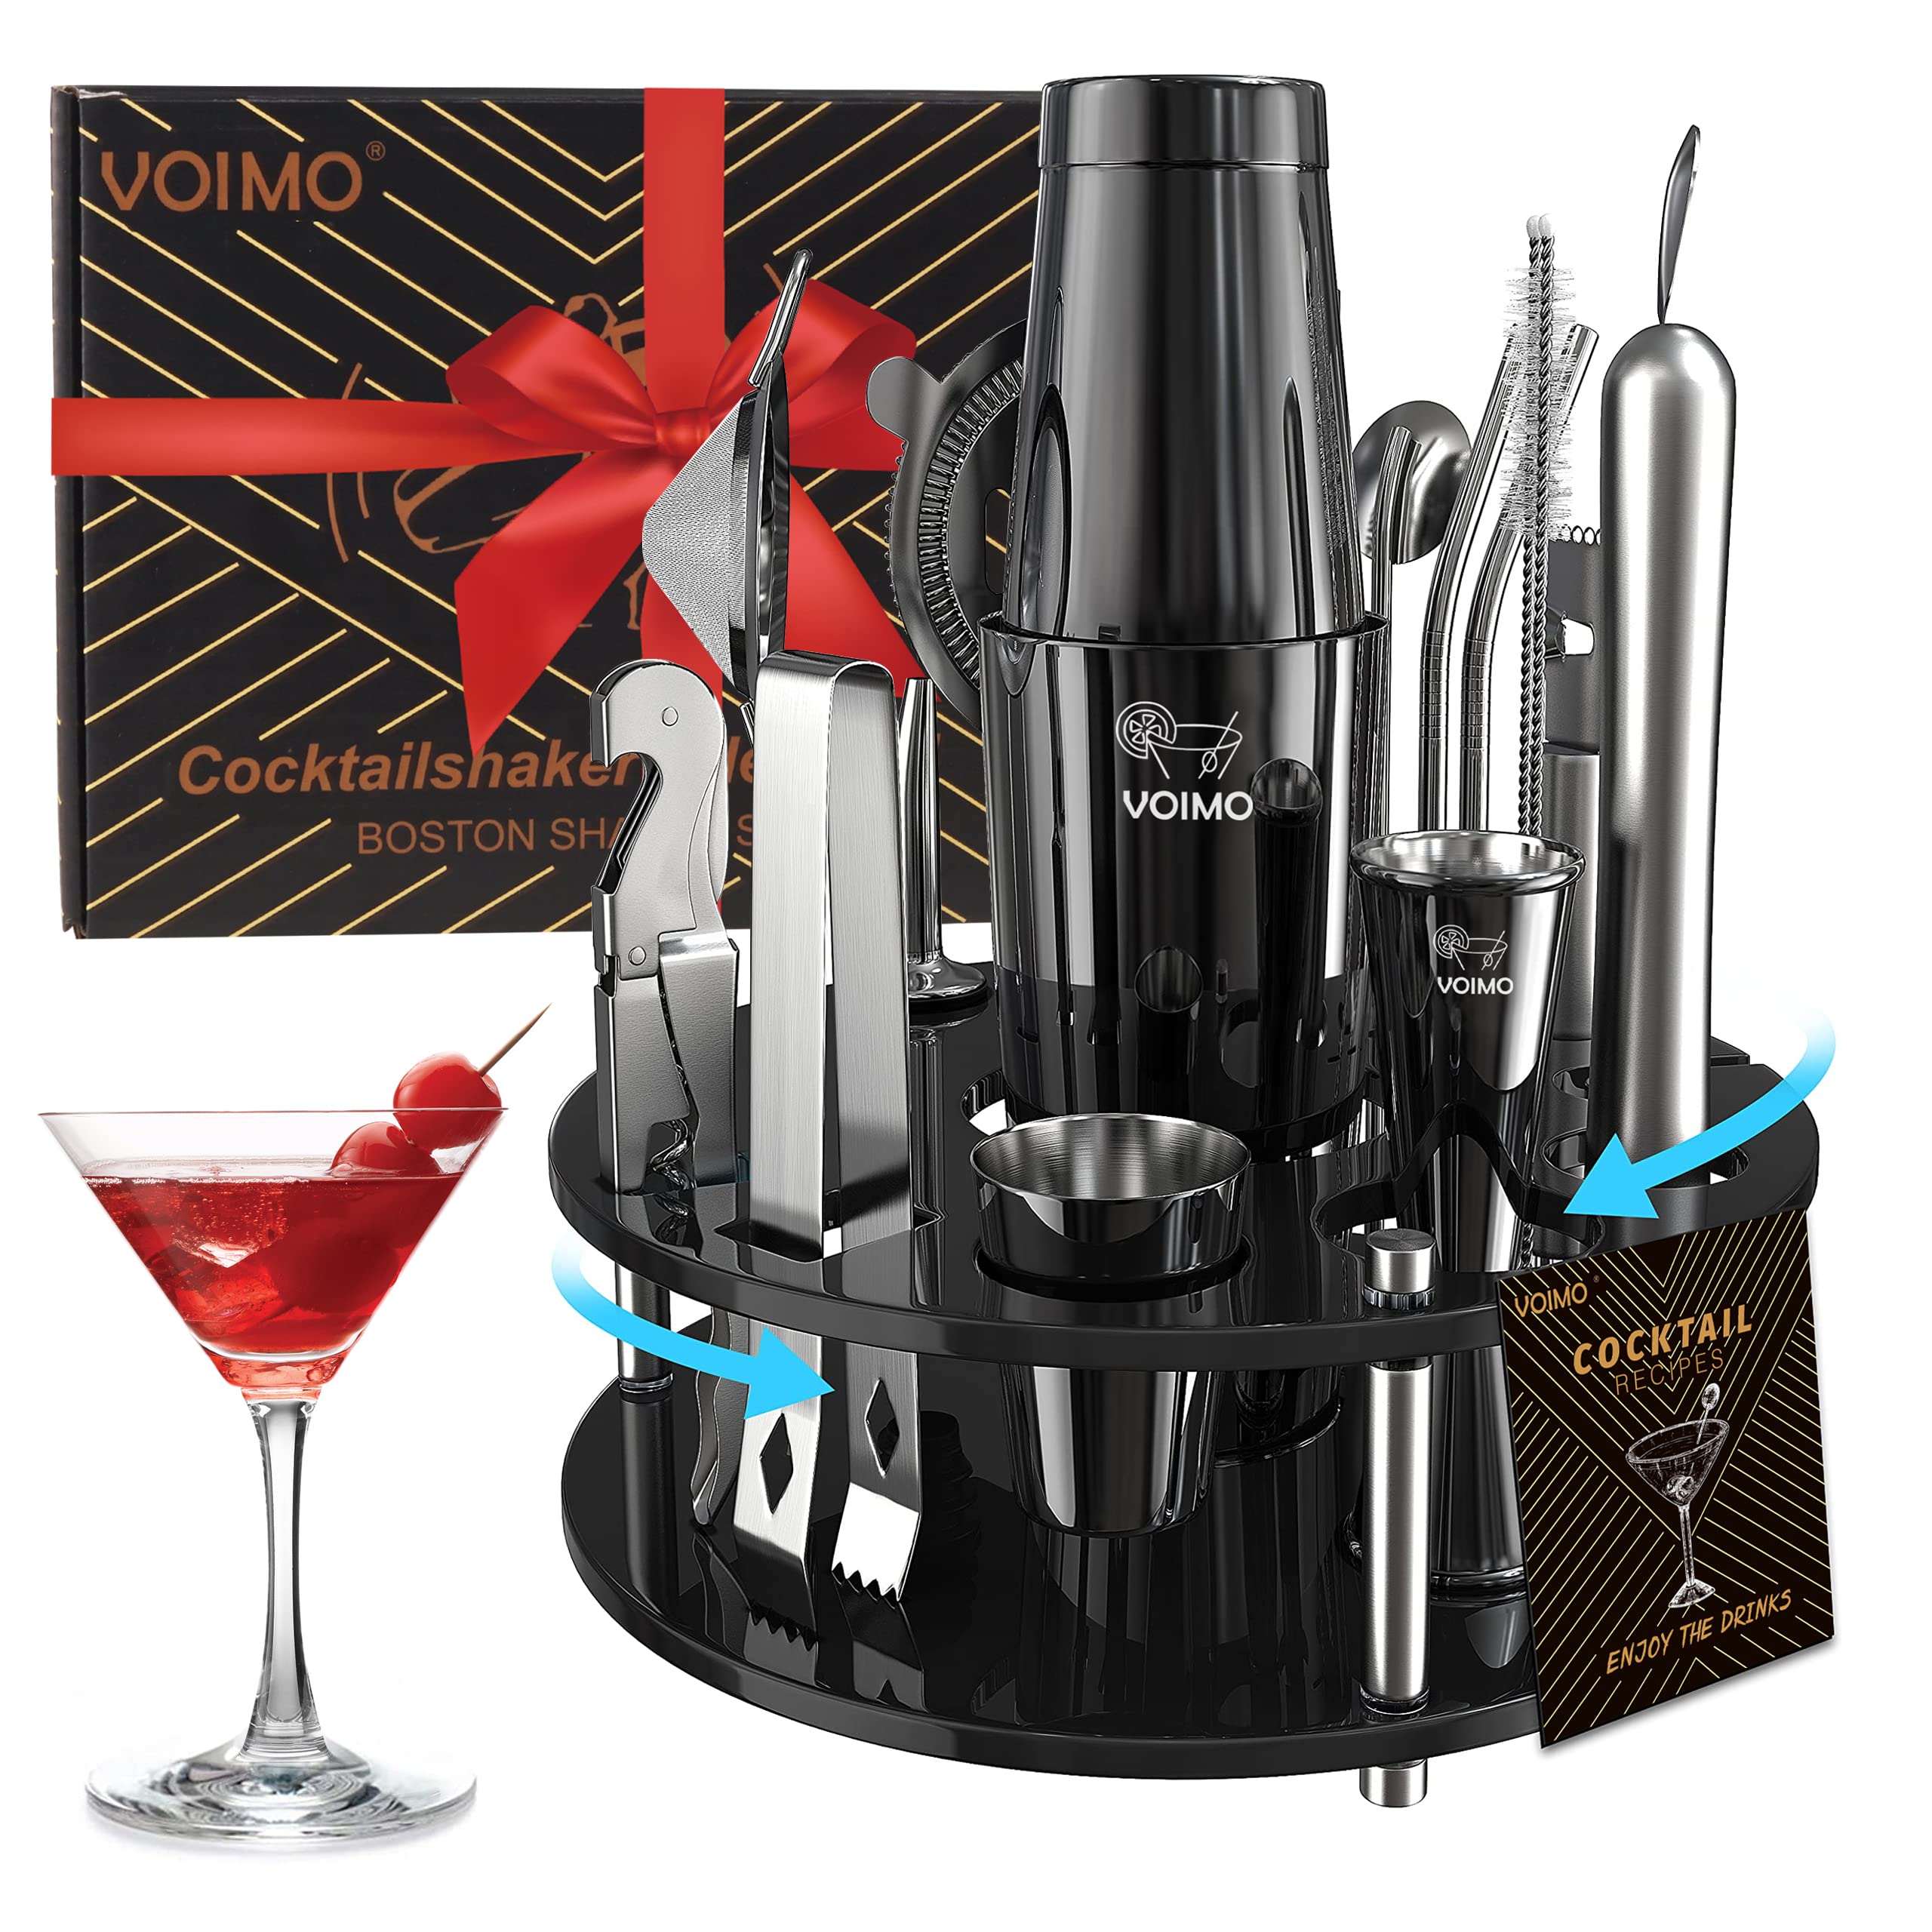 Bartender Kit Cocktail Set, VOIMO Stainless Steel Premium Cocktail Shaker Set Boston Shaker, 22 Piece Bar Tools Set with Better Acrylic Stand, Cocktail Gift Set for Holiday Day, Home or Bar